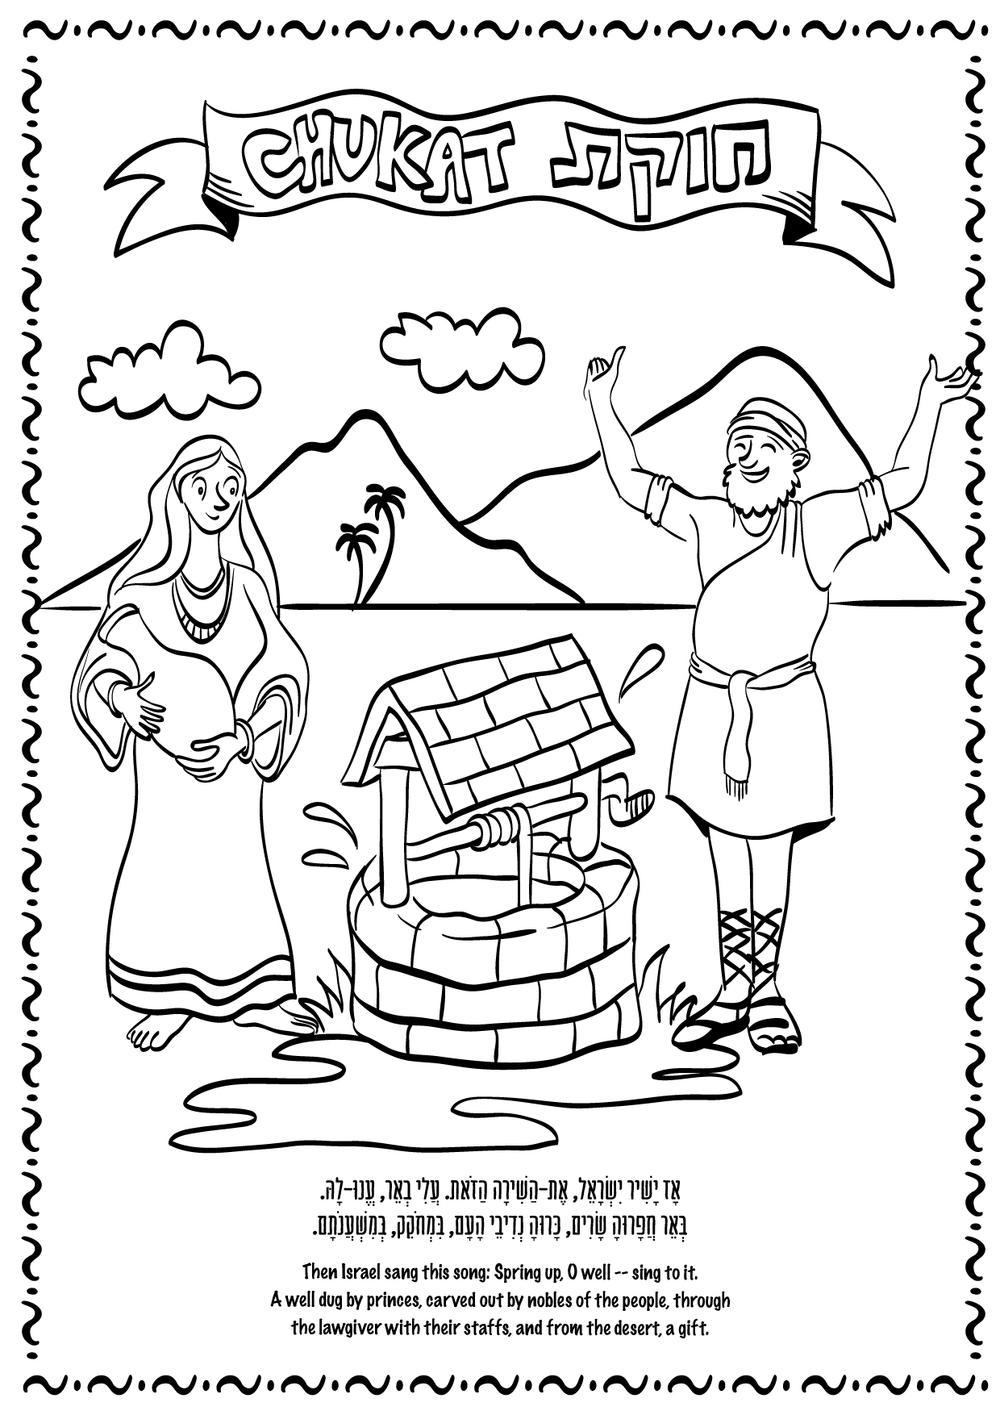 Download One parsha at a time, coloring pages aim to make Torah more inspiring for children — JNS.org